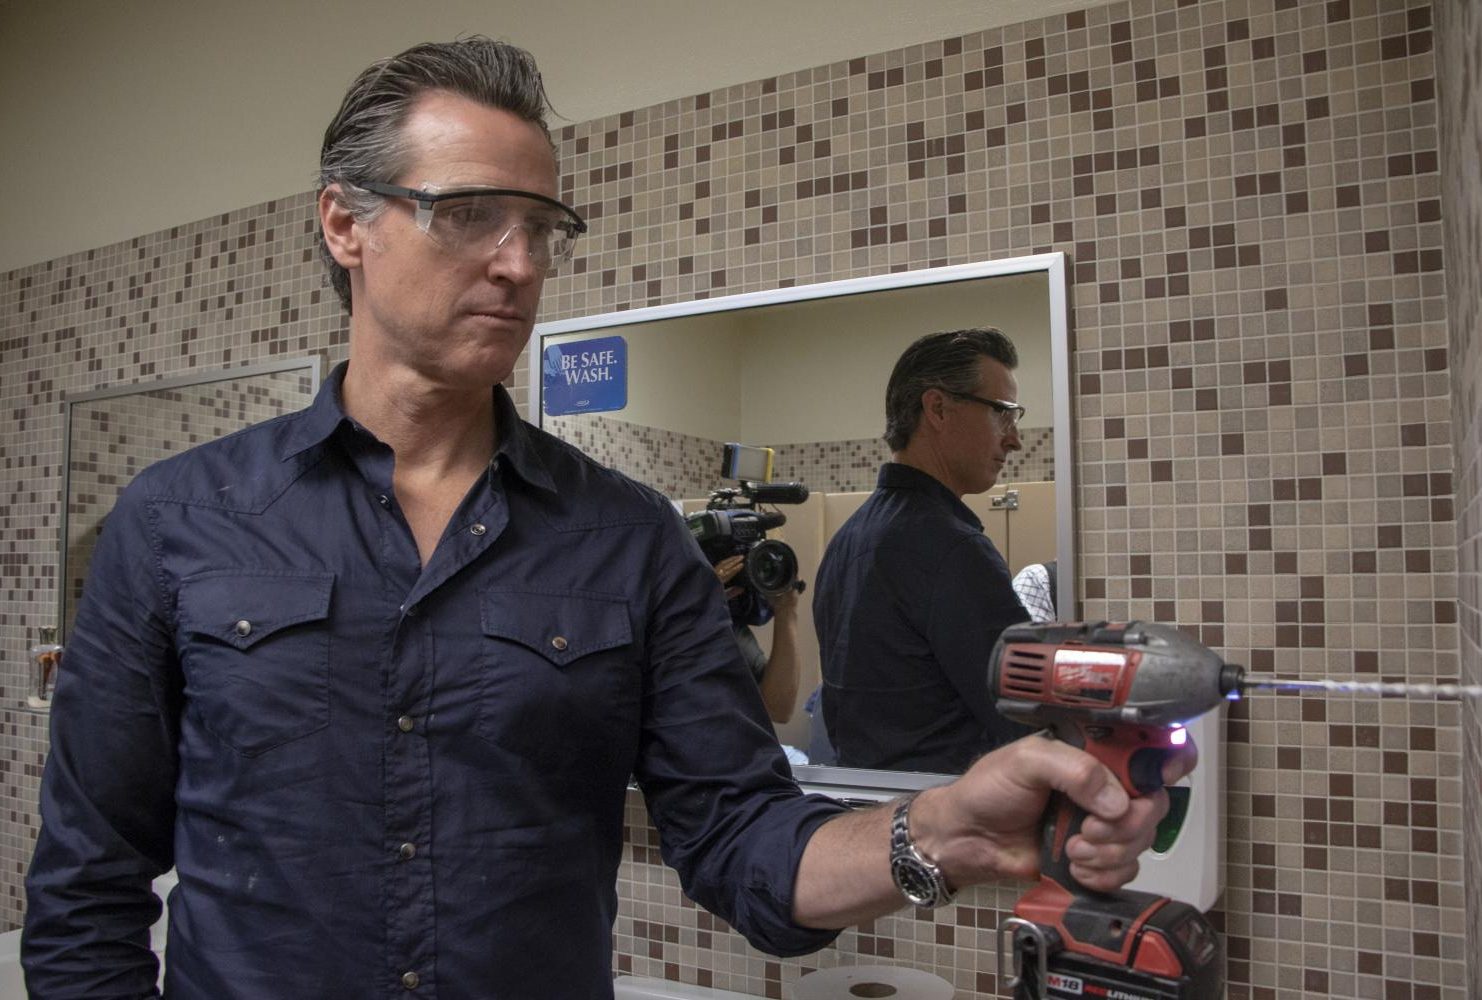 Governor Gavin Newsom assist Maria Arambula with replacing the paper towel dispenser at American River College during International Workers’ Day on May 1, 2019. (Photo by Ashley Hayes-Stone)